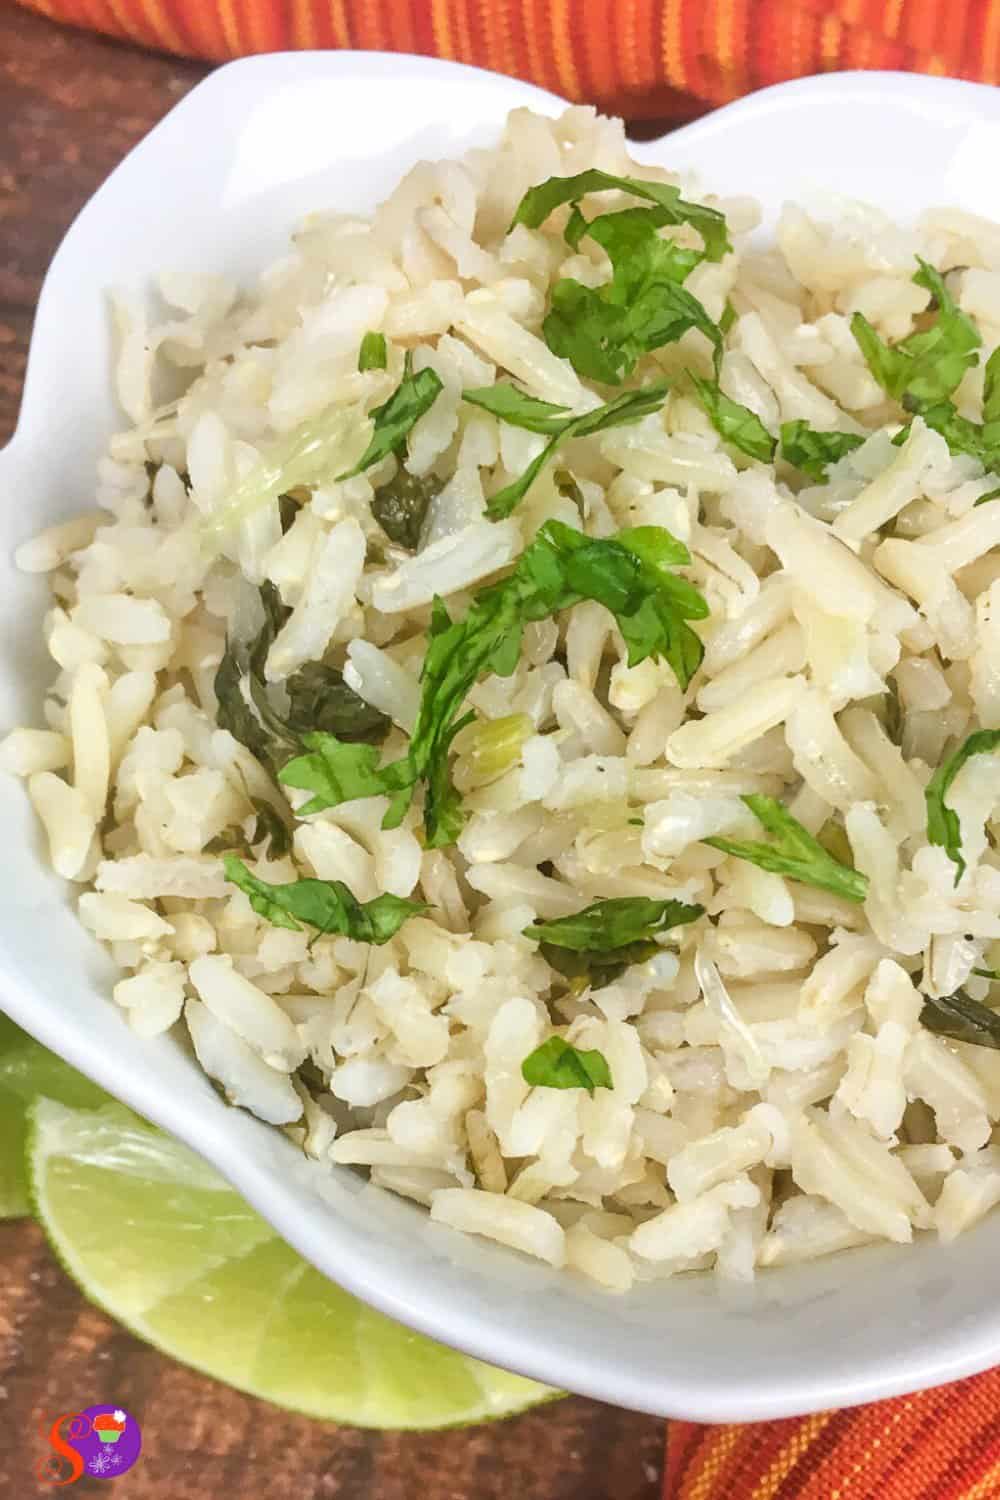 Brown rice is flavored with fresh lime juice, lime zest, garlic, and cilantro in this simple Cilantro Lime Rice recipe!  